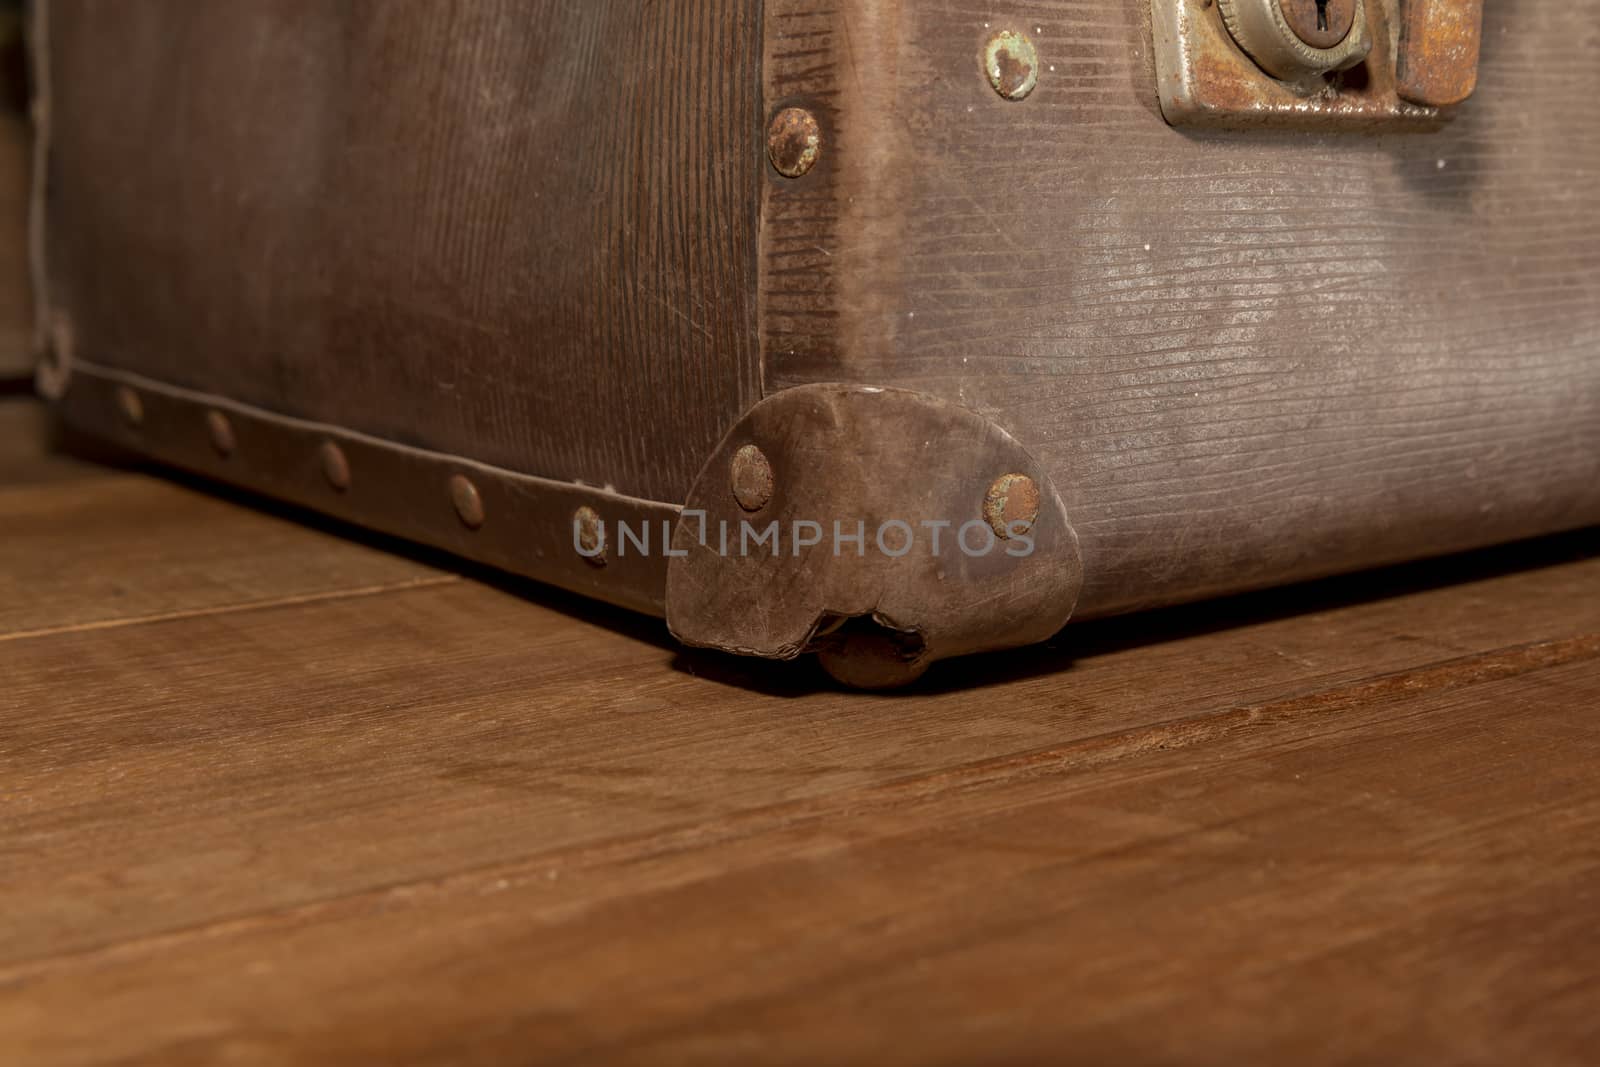 A damaged corner protector on an old brown leather suitcase